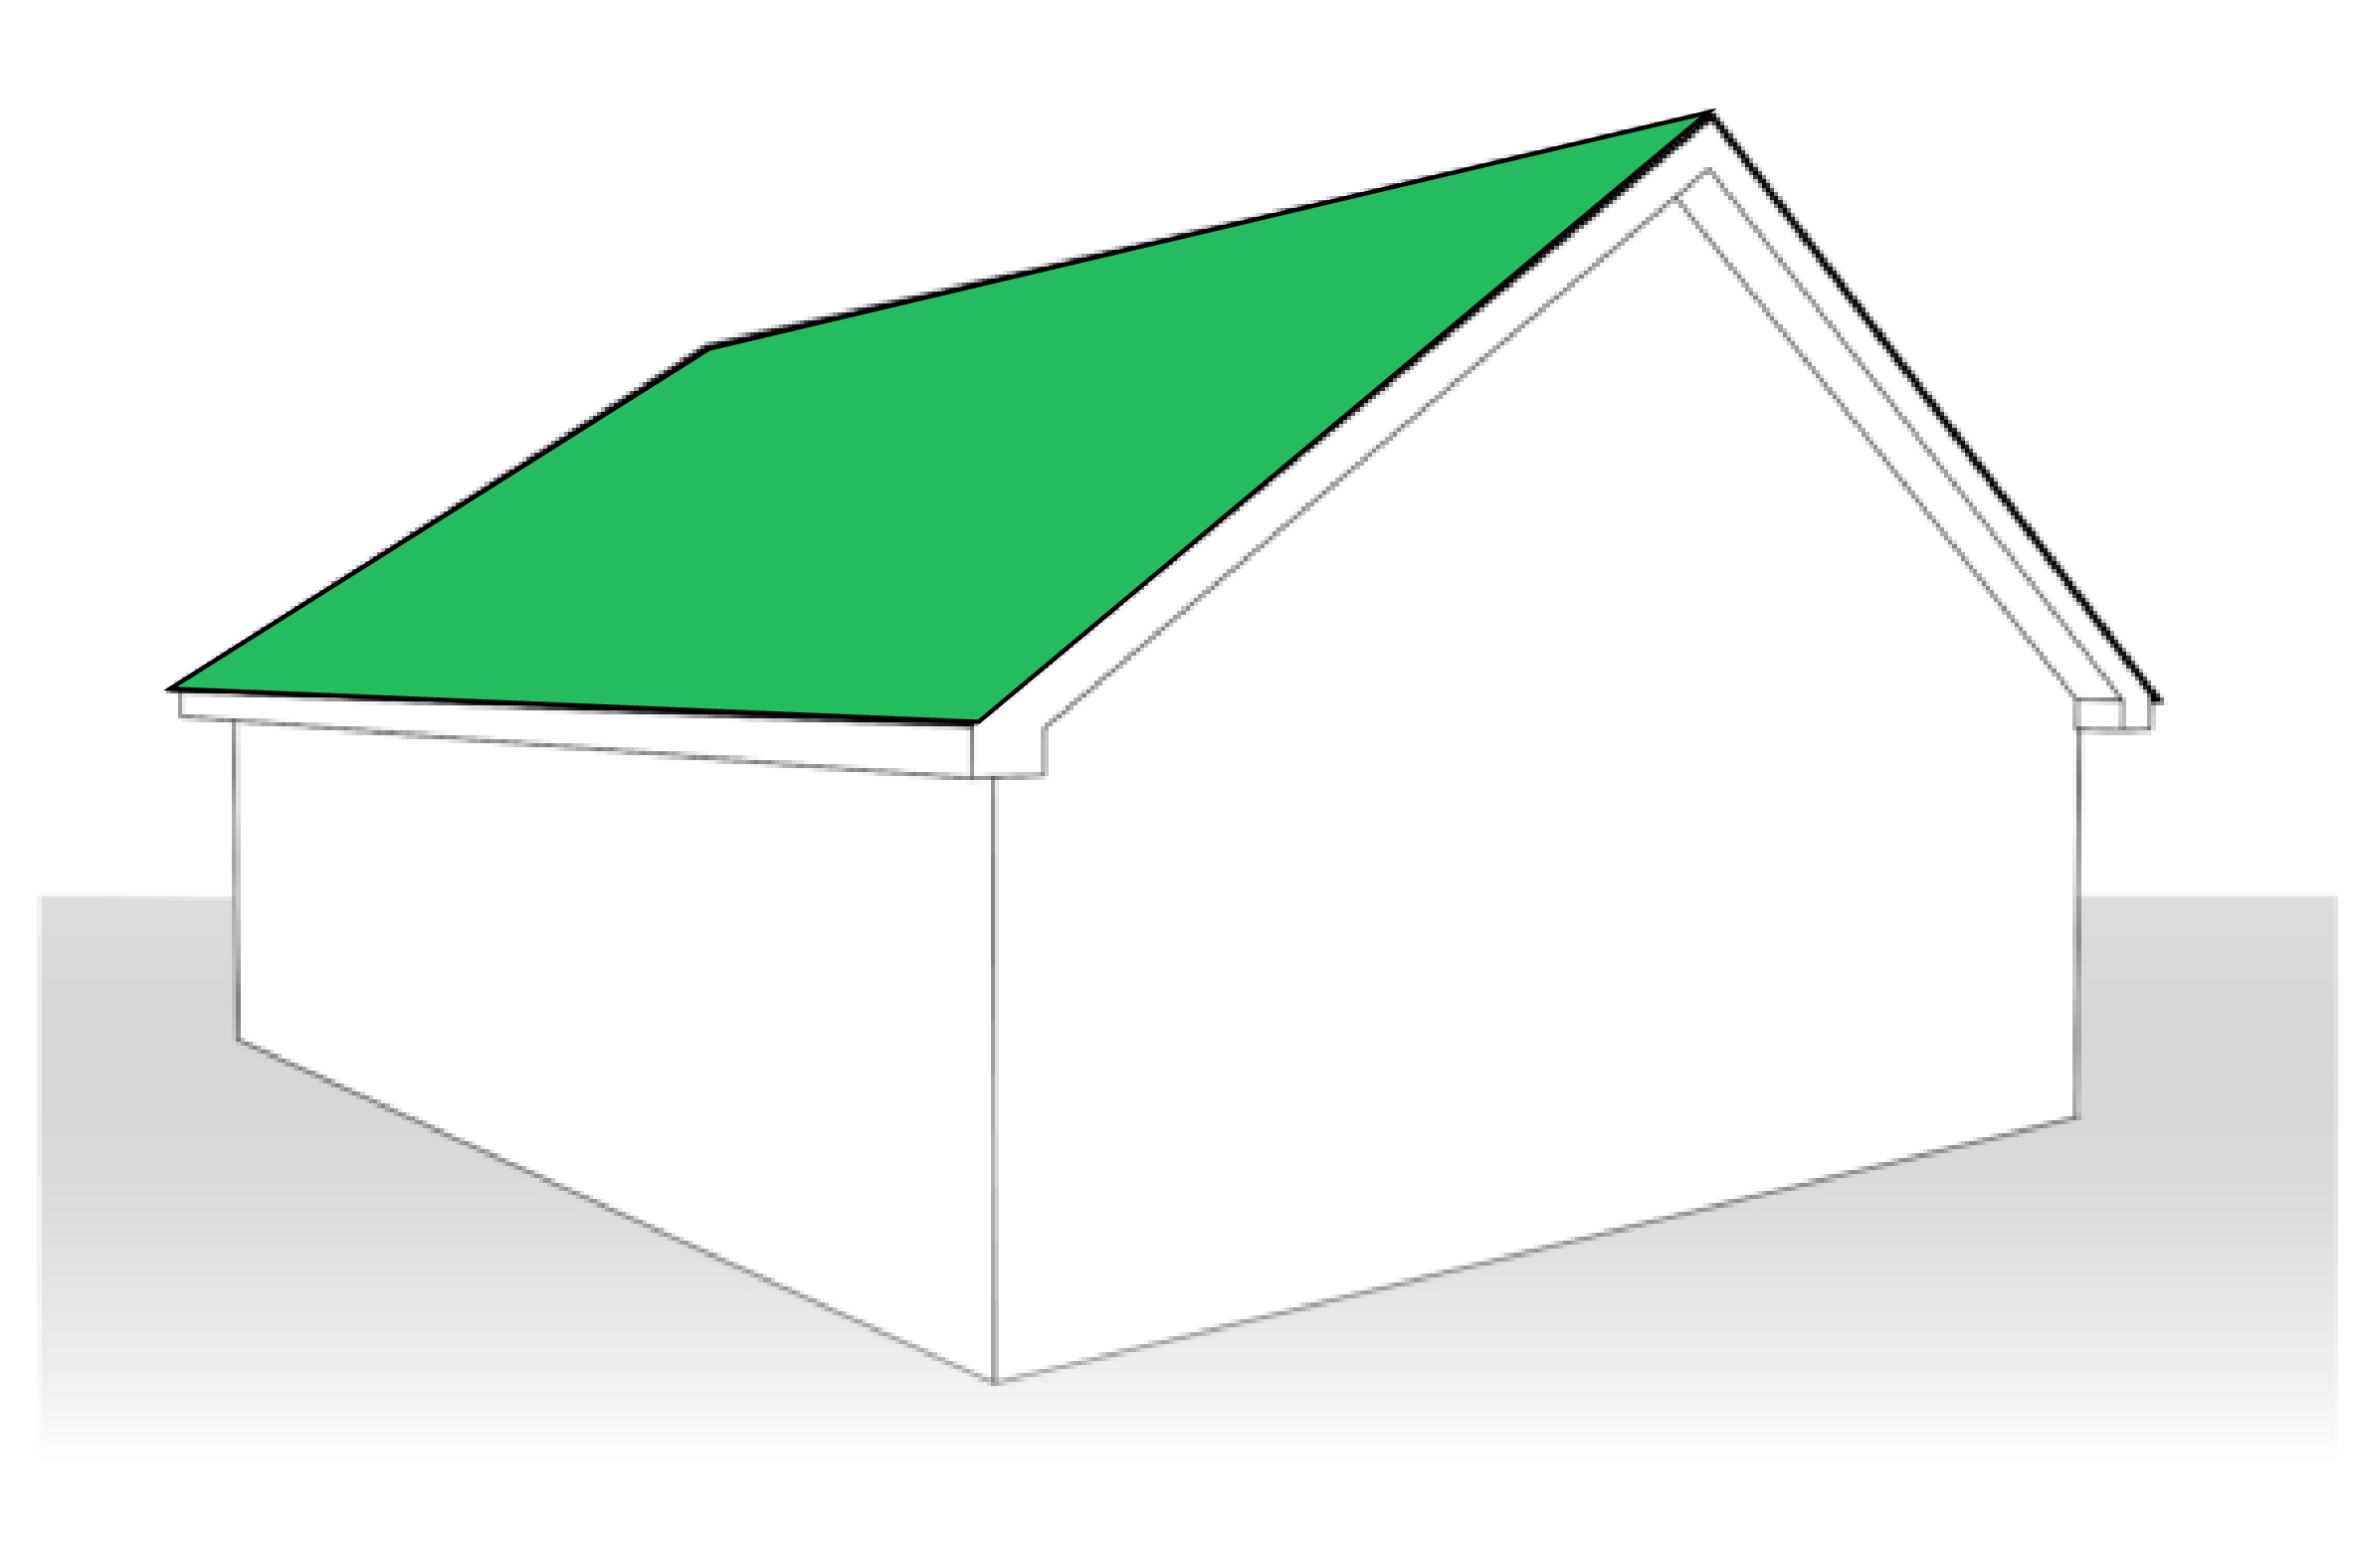 Gable Roof (Eight Most Common Roof Types)